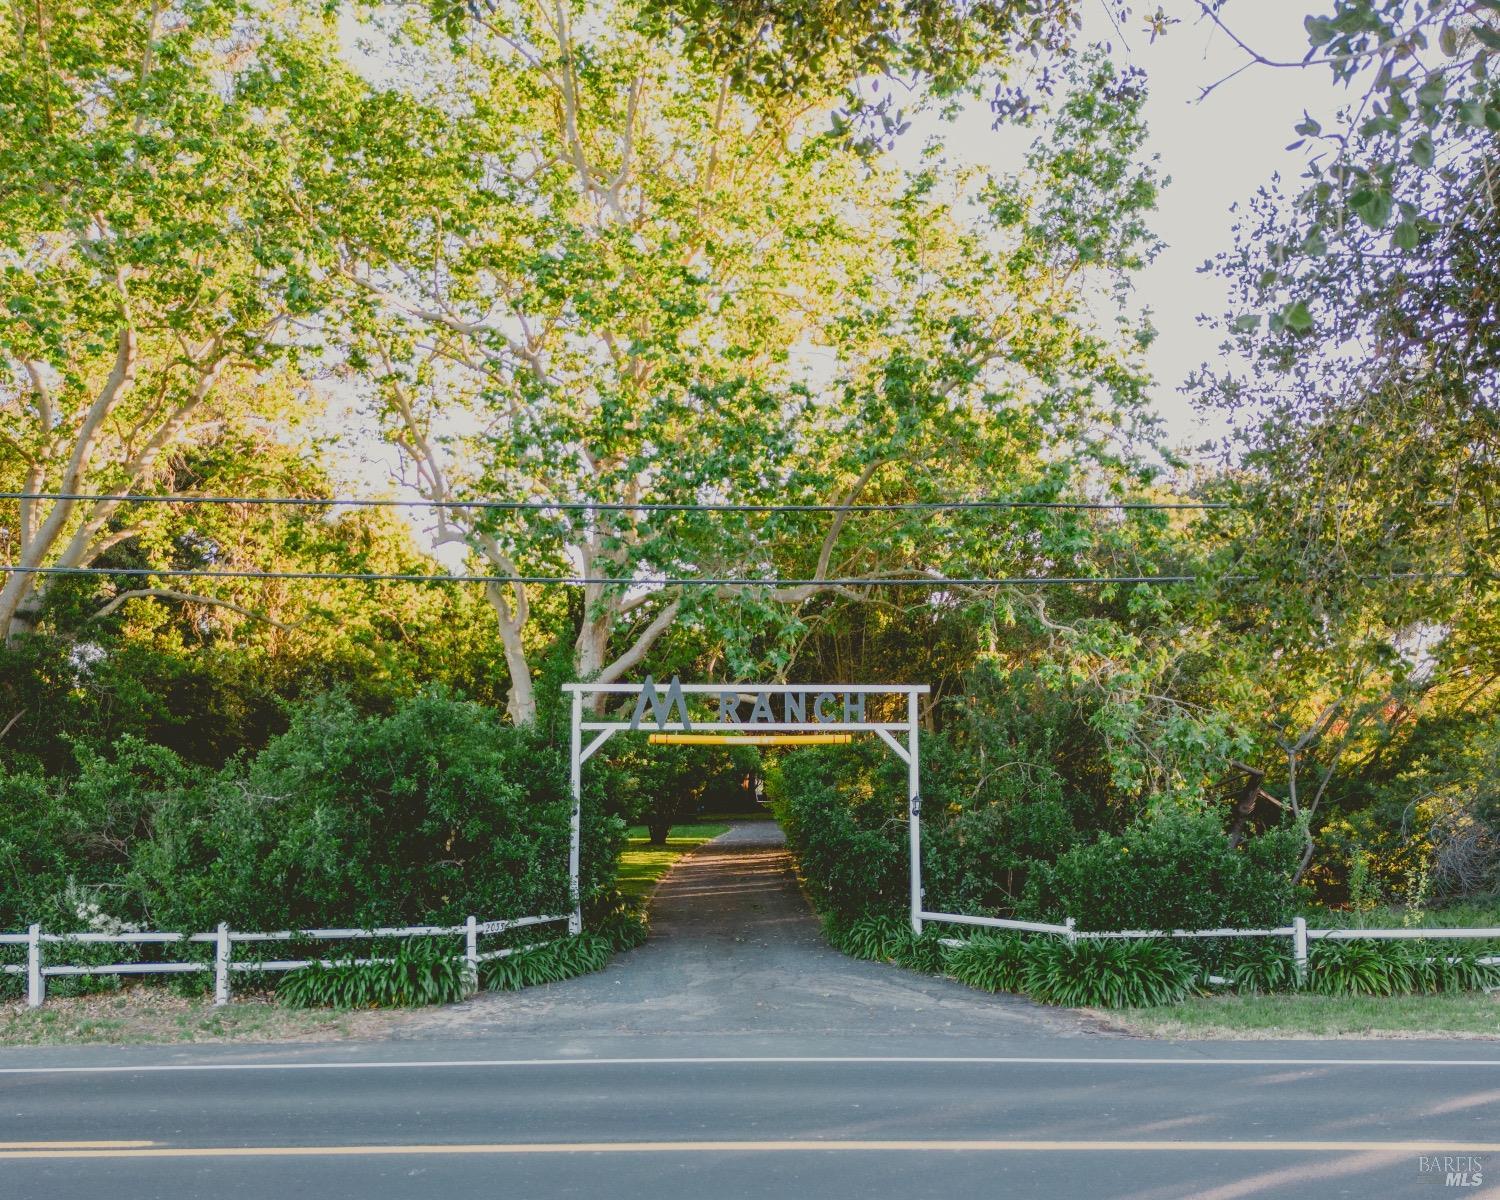 Main entrance to the ranch from Cuttings Wharf Road